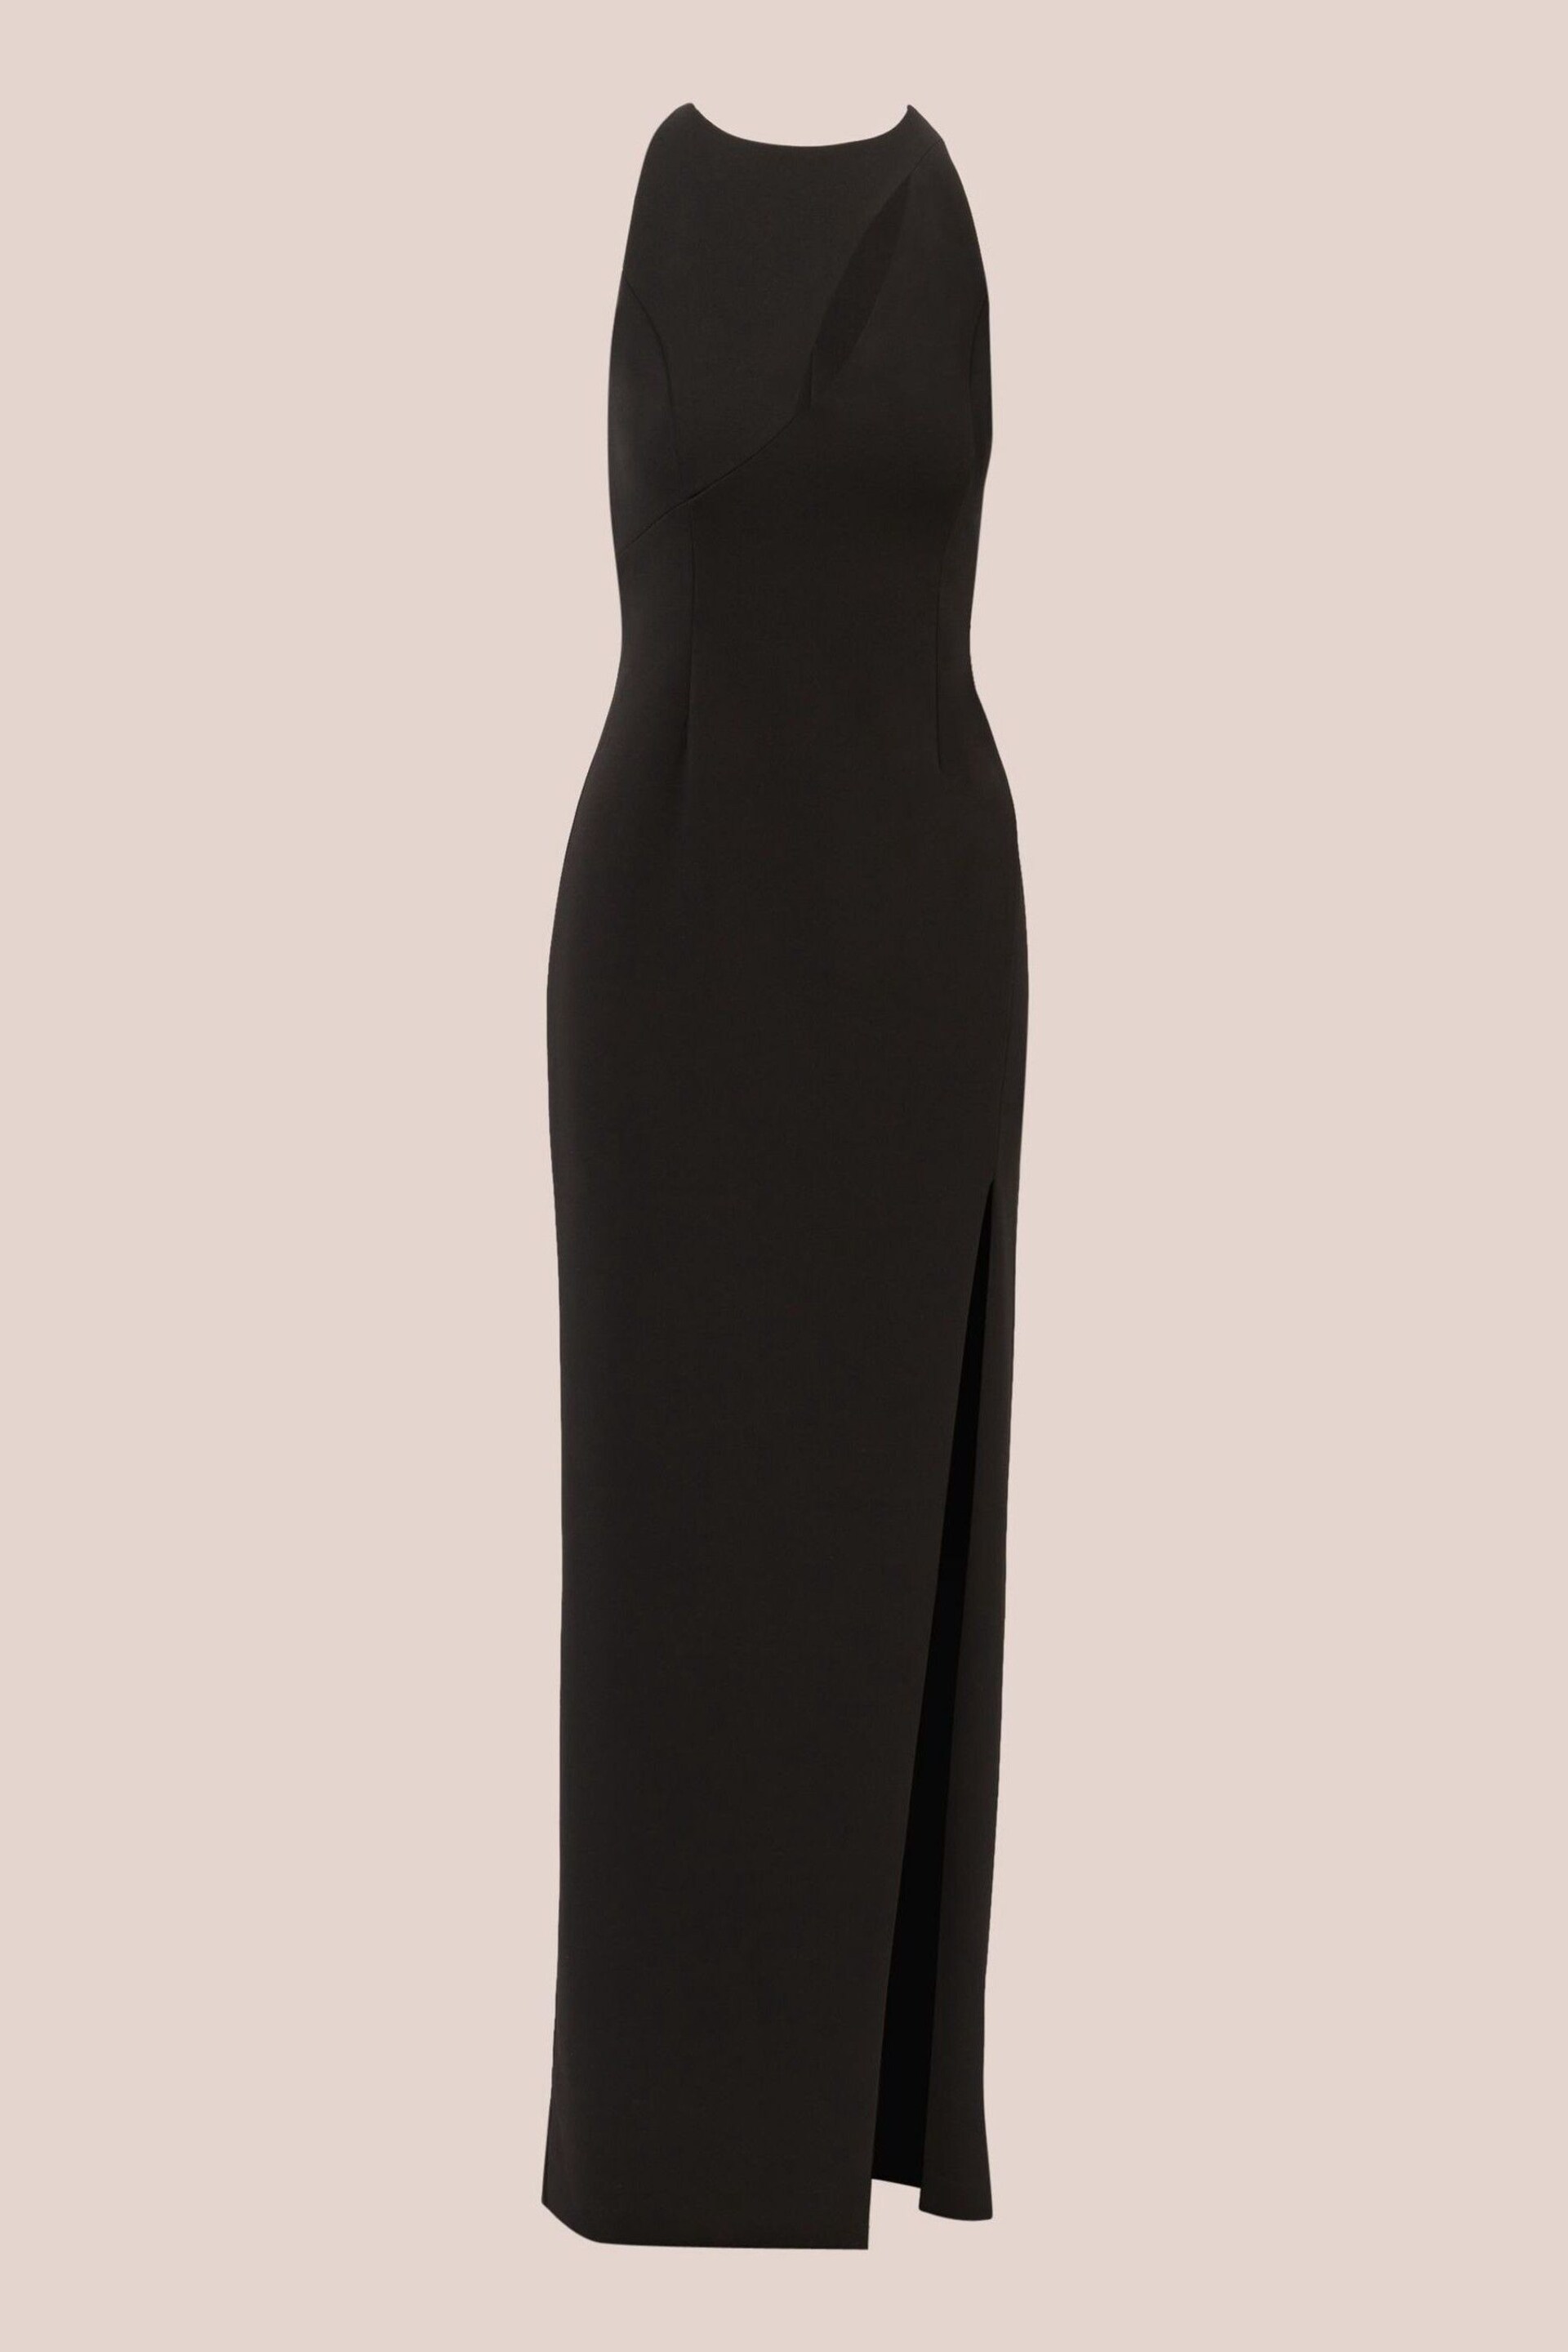 Aidan by Adrianna Papell Sleeveless Knit Crepe Black Gown - Image 6 of 7